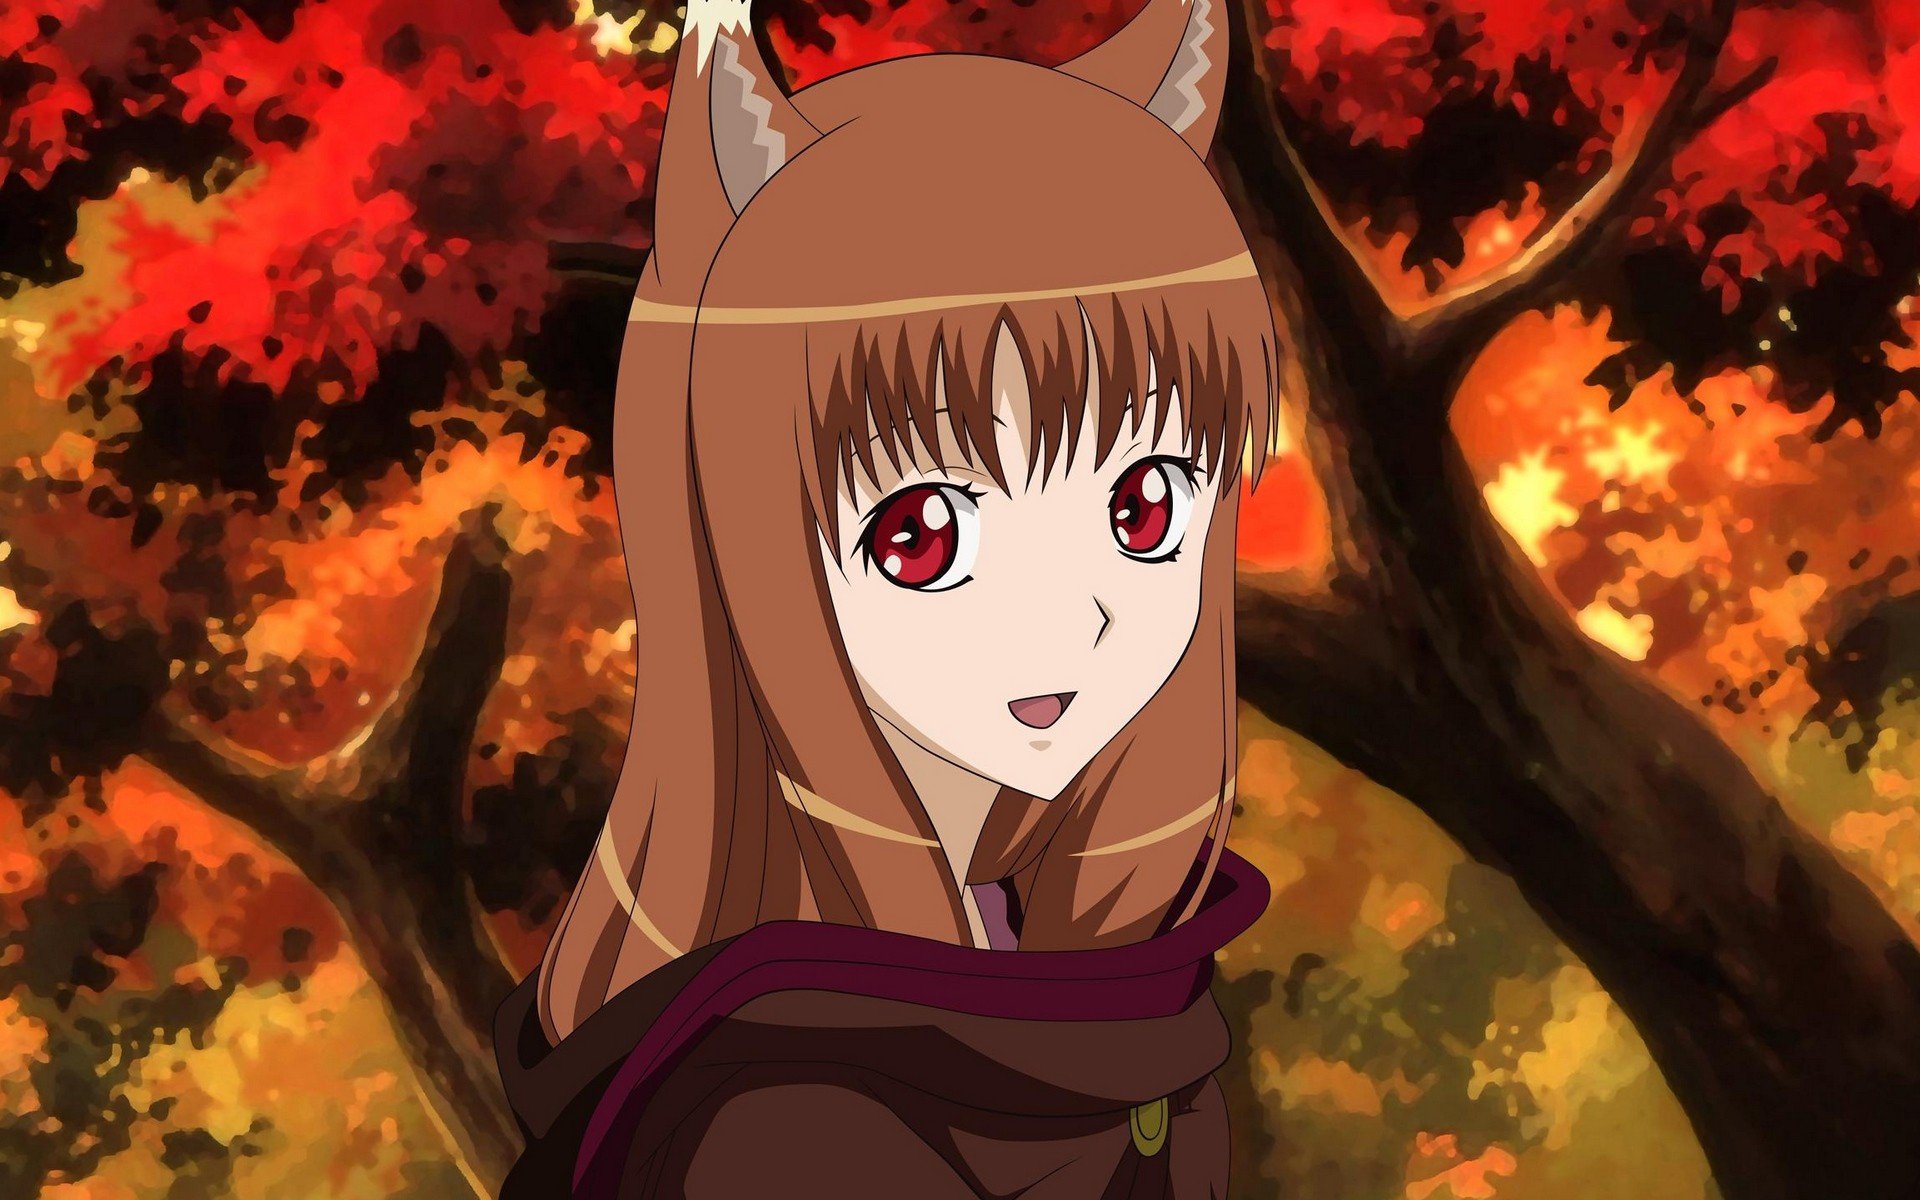 Spice and Wolf Wallpaper